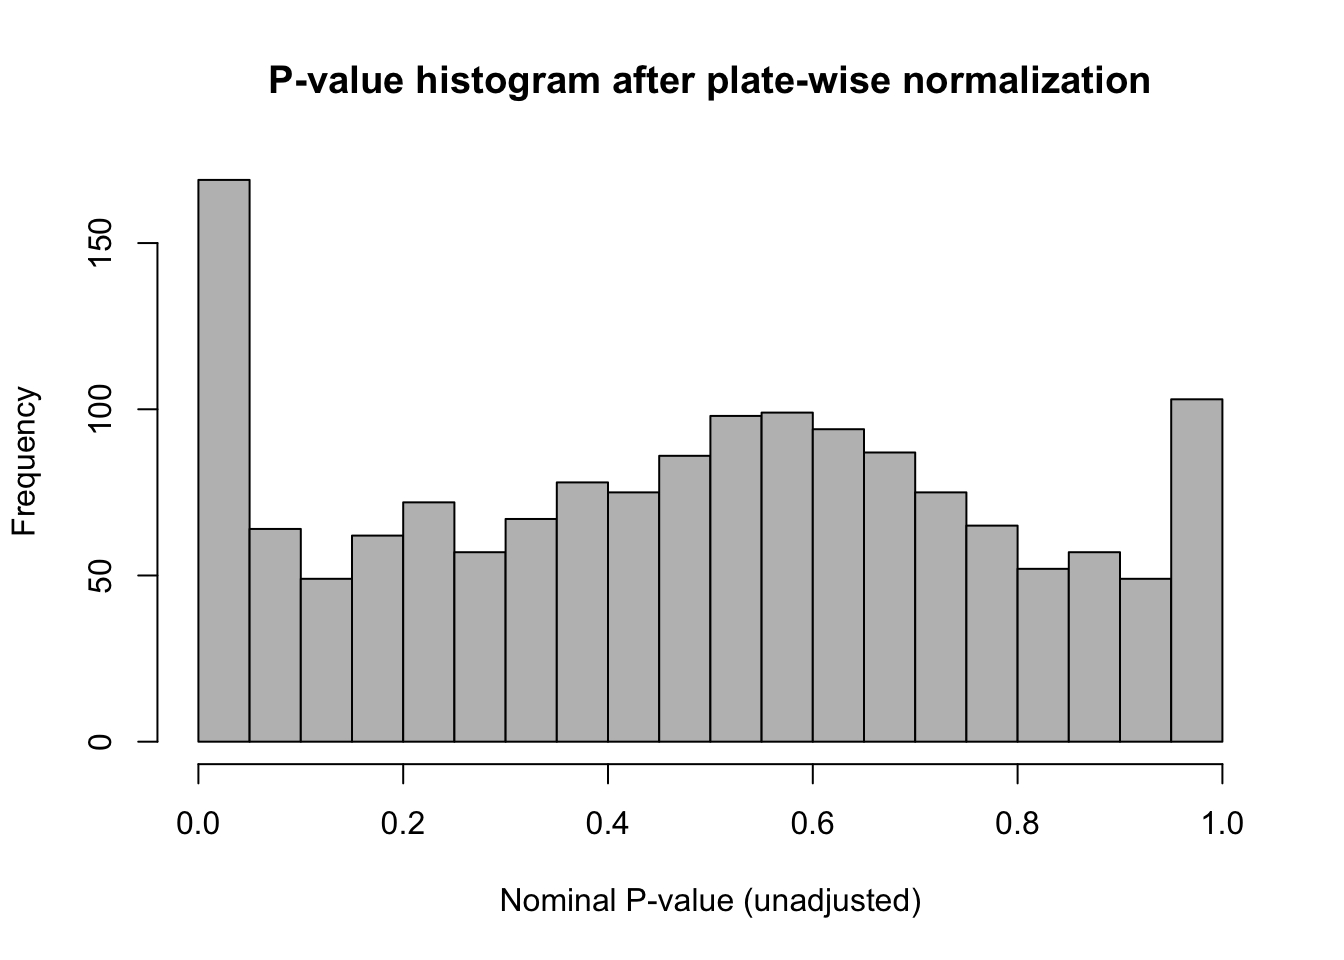 Histogram of the nominal (unadjusted) p-values derived from the plate-wise IQR-standardized relative viability. 